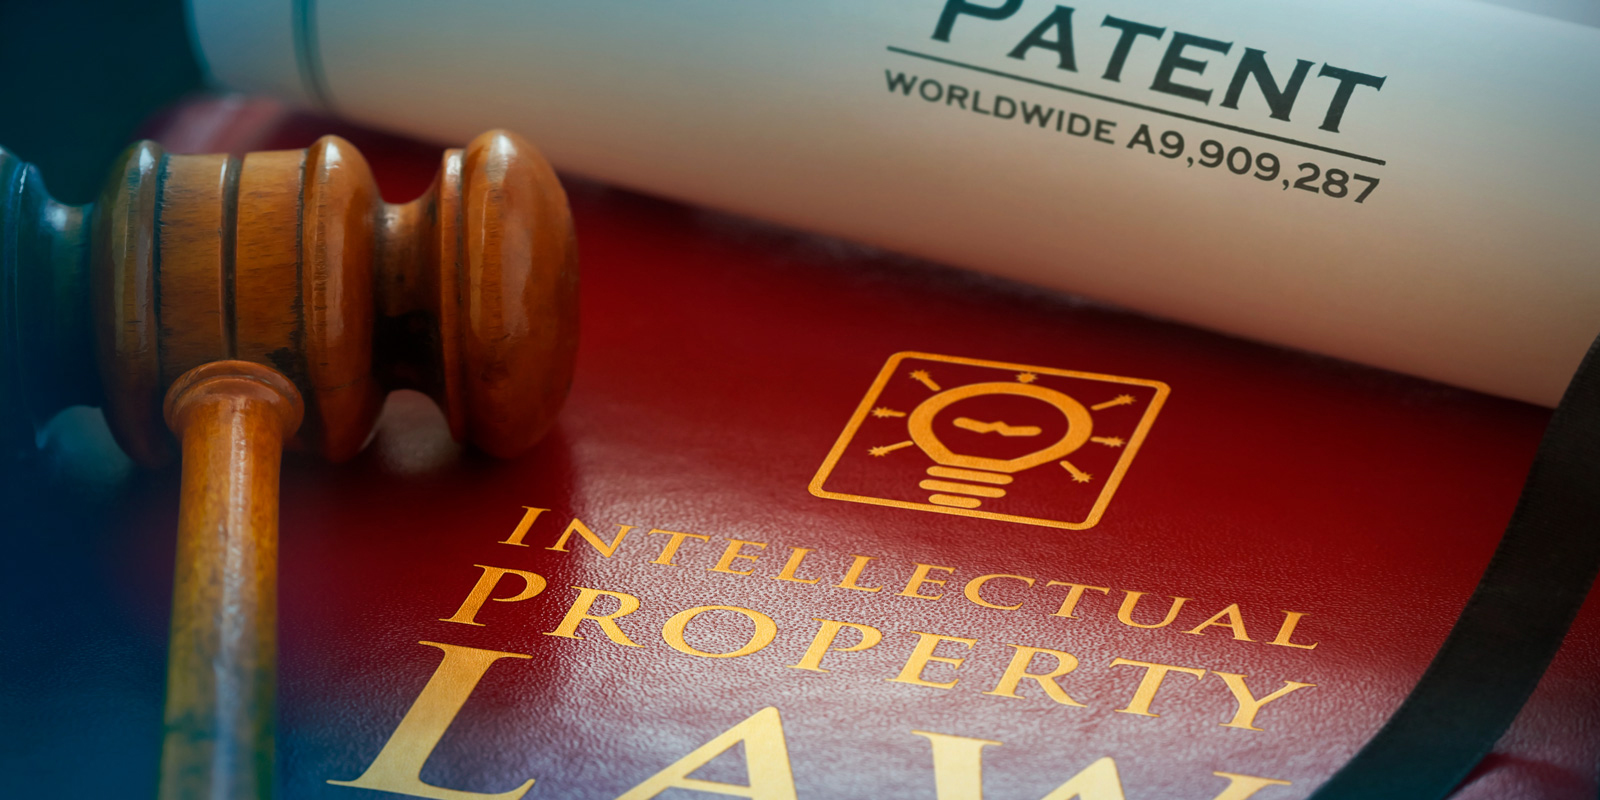 Image of property law book